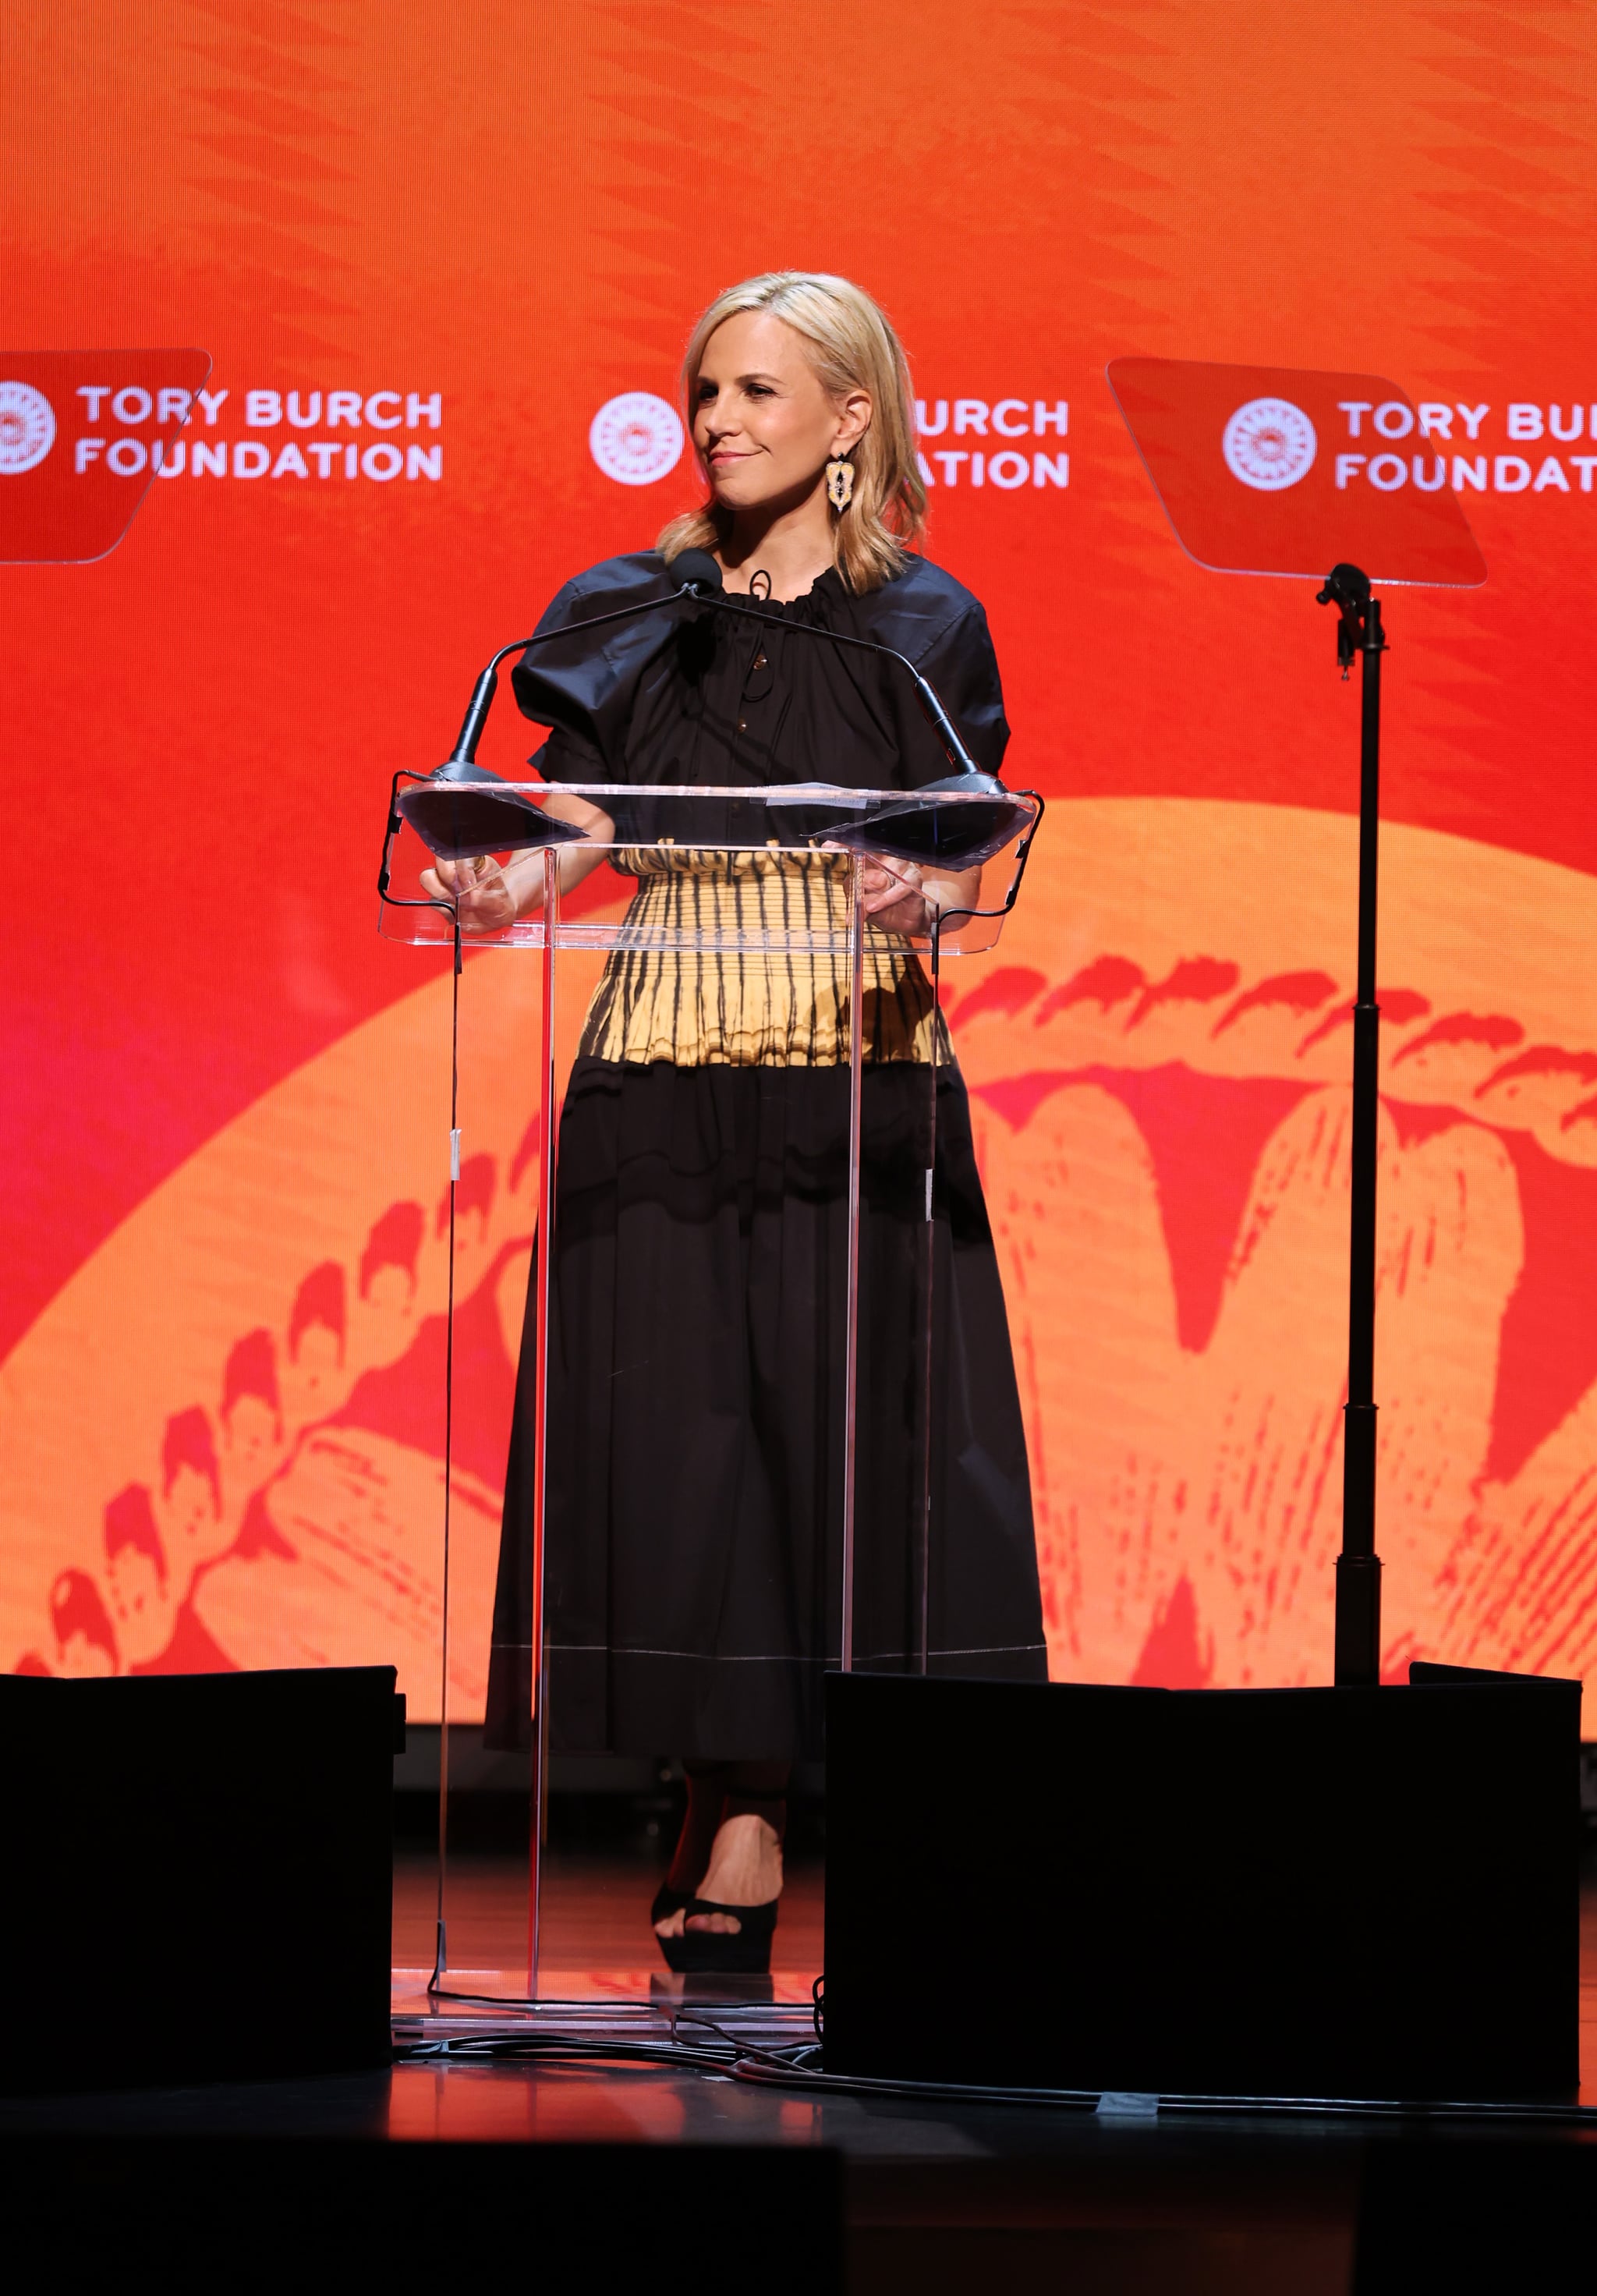 On Starting the Tory Burch Foundation | Tory Burch on Roe v. Wade and the  Women Who've Shaped Her Life and Business | POPSUGAR Fashion Photo 2